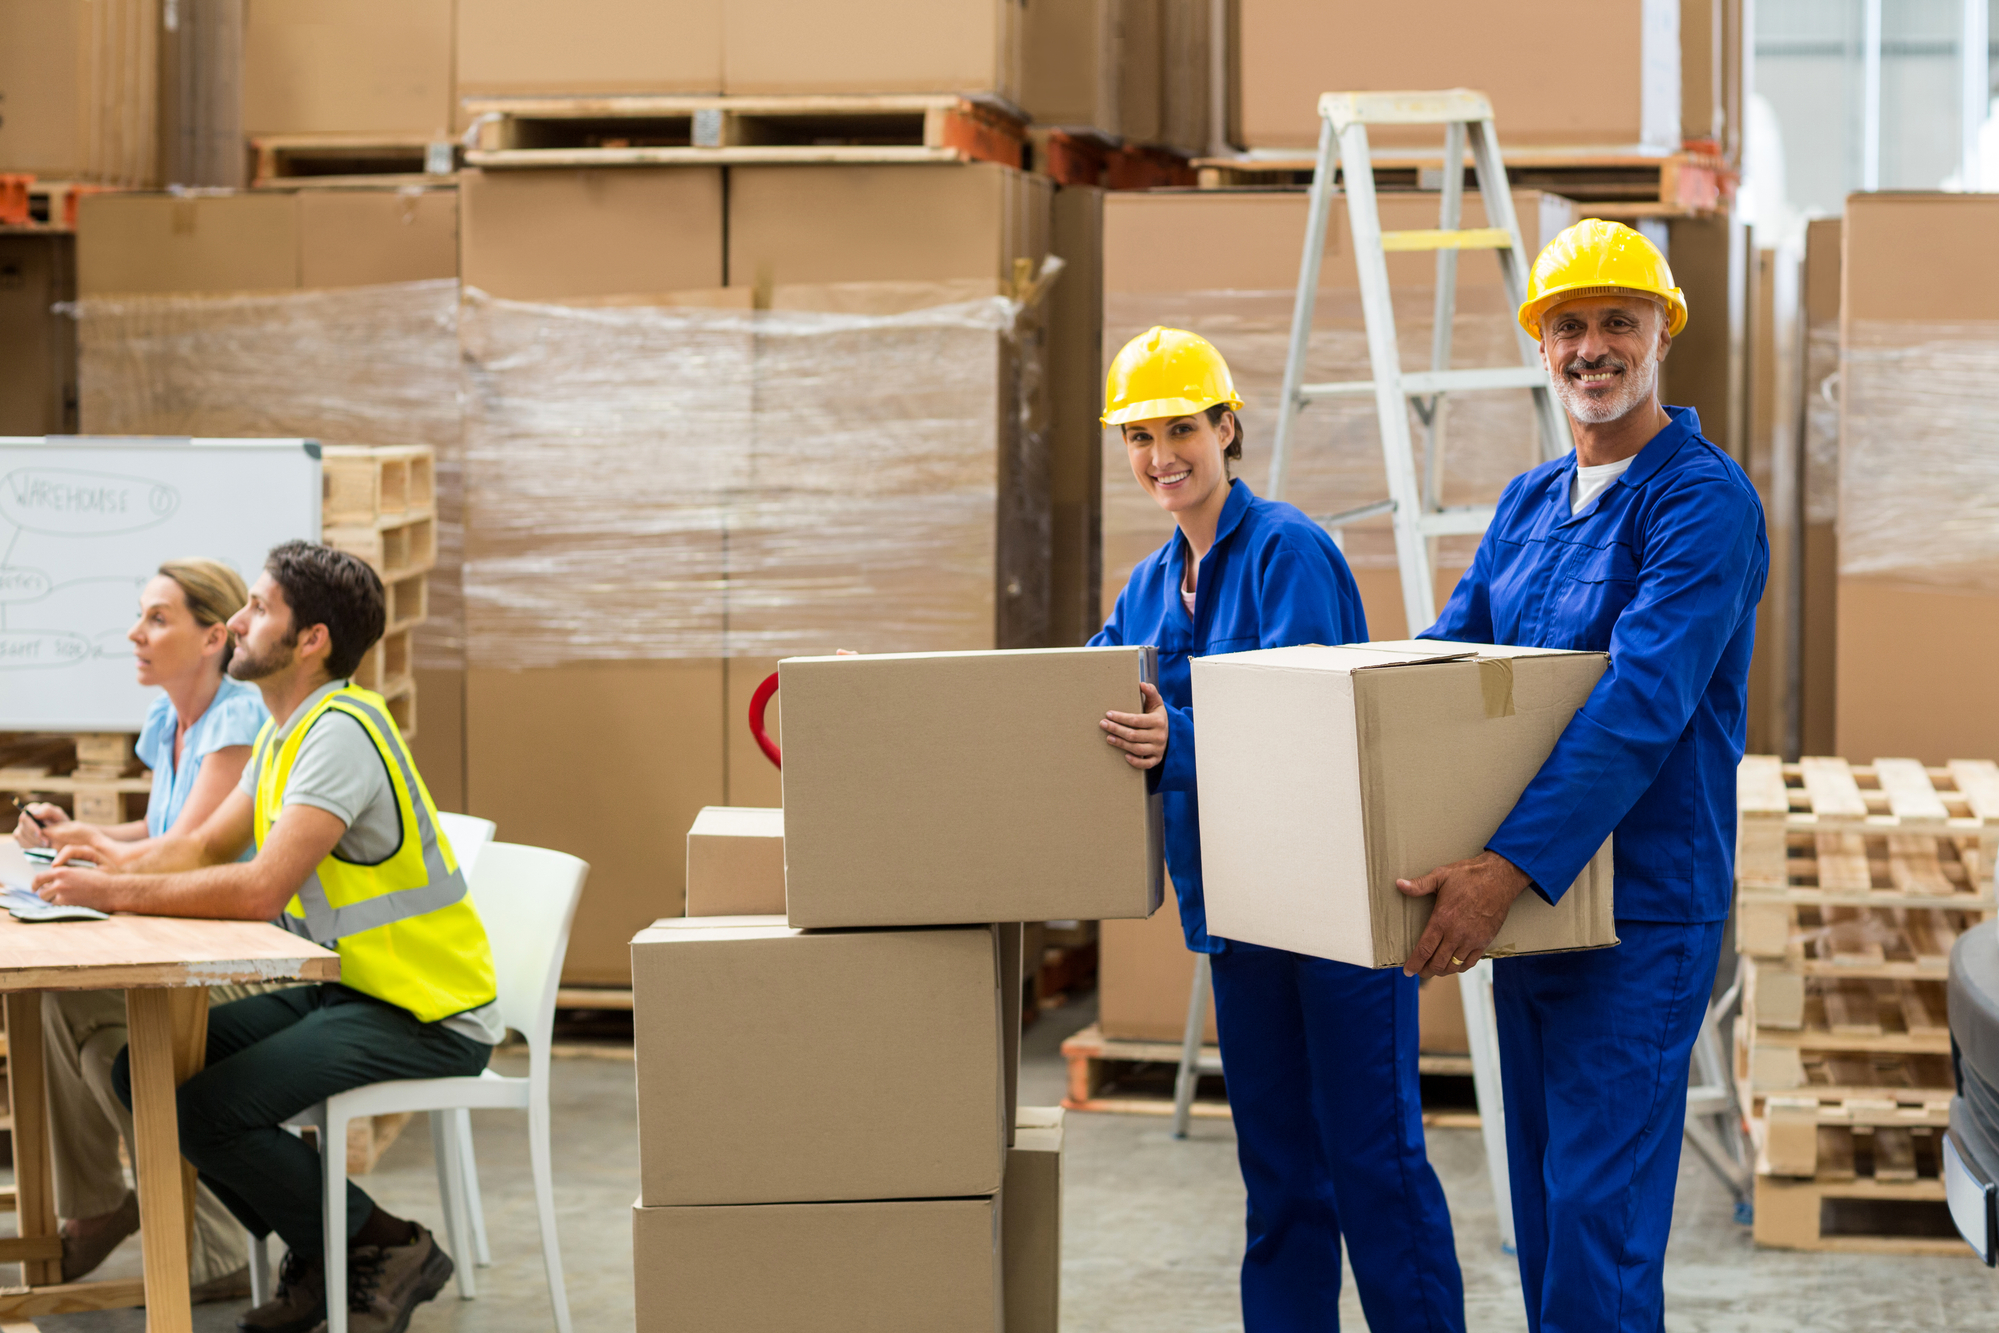 Smiling workers looking at camera in warehouse